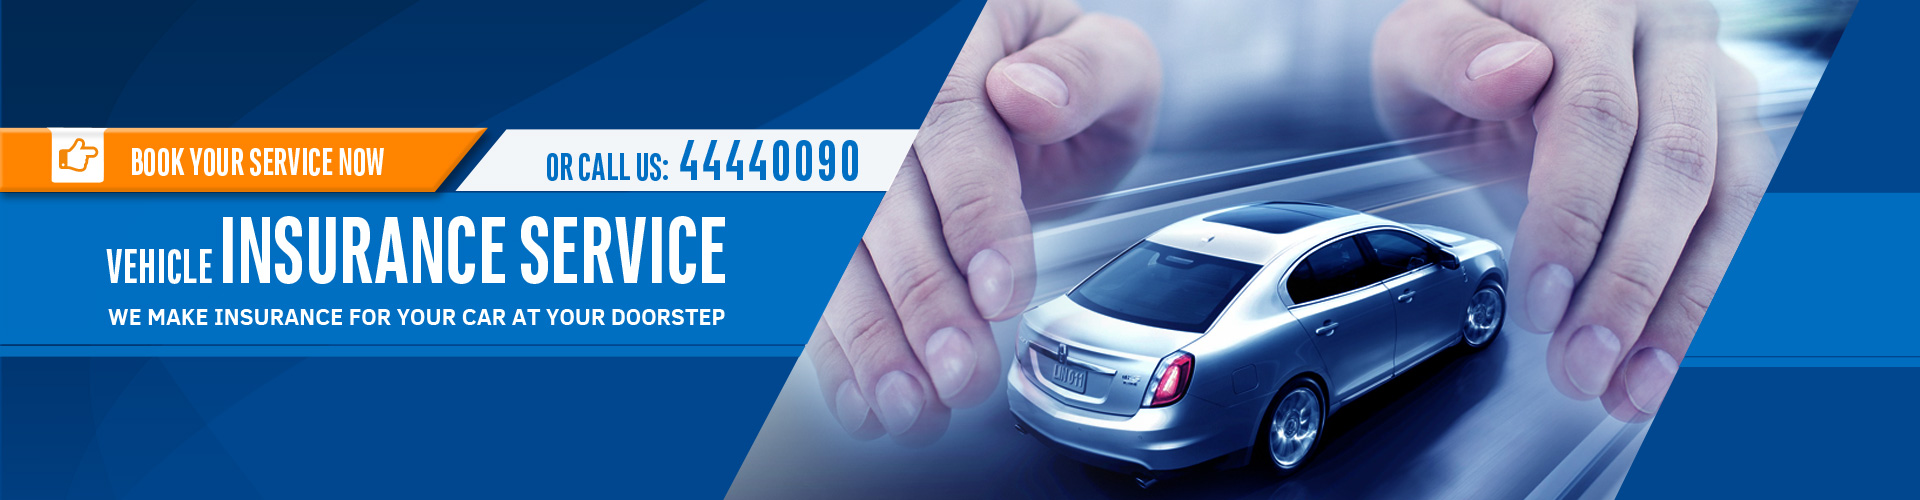 Vehicle Insurance Services in Qatar